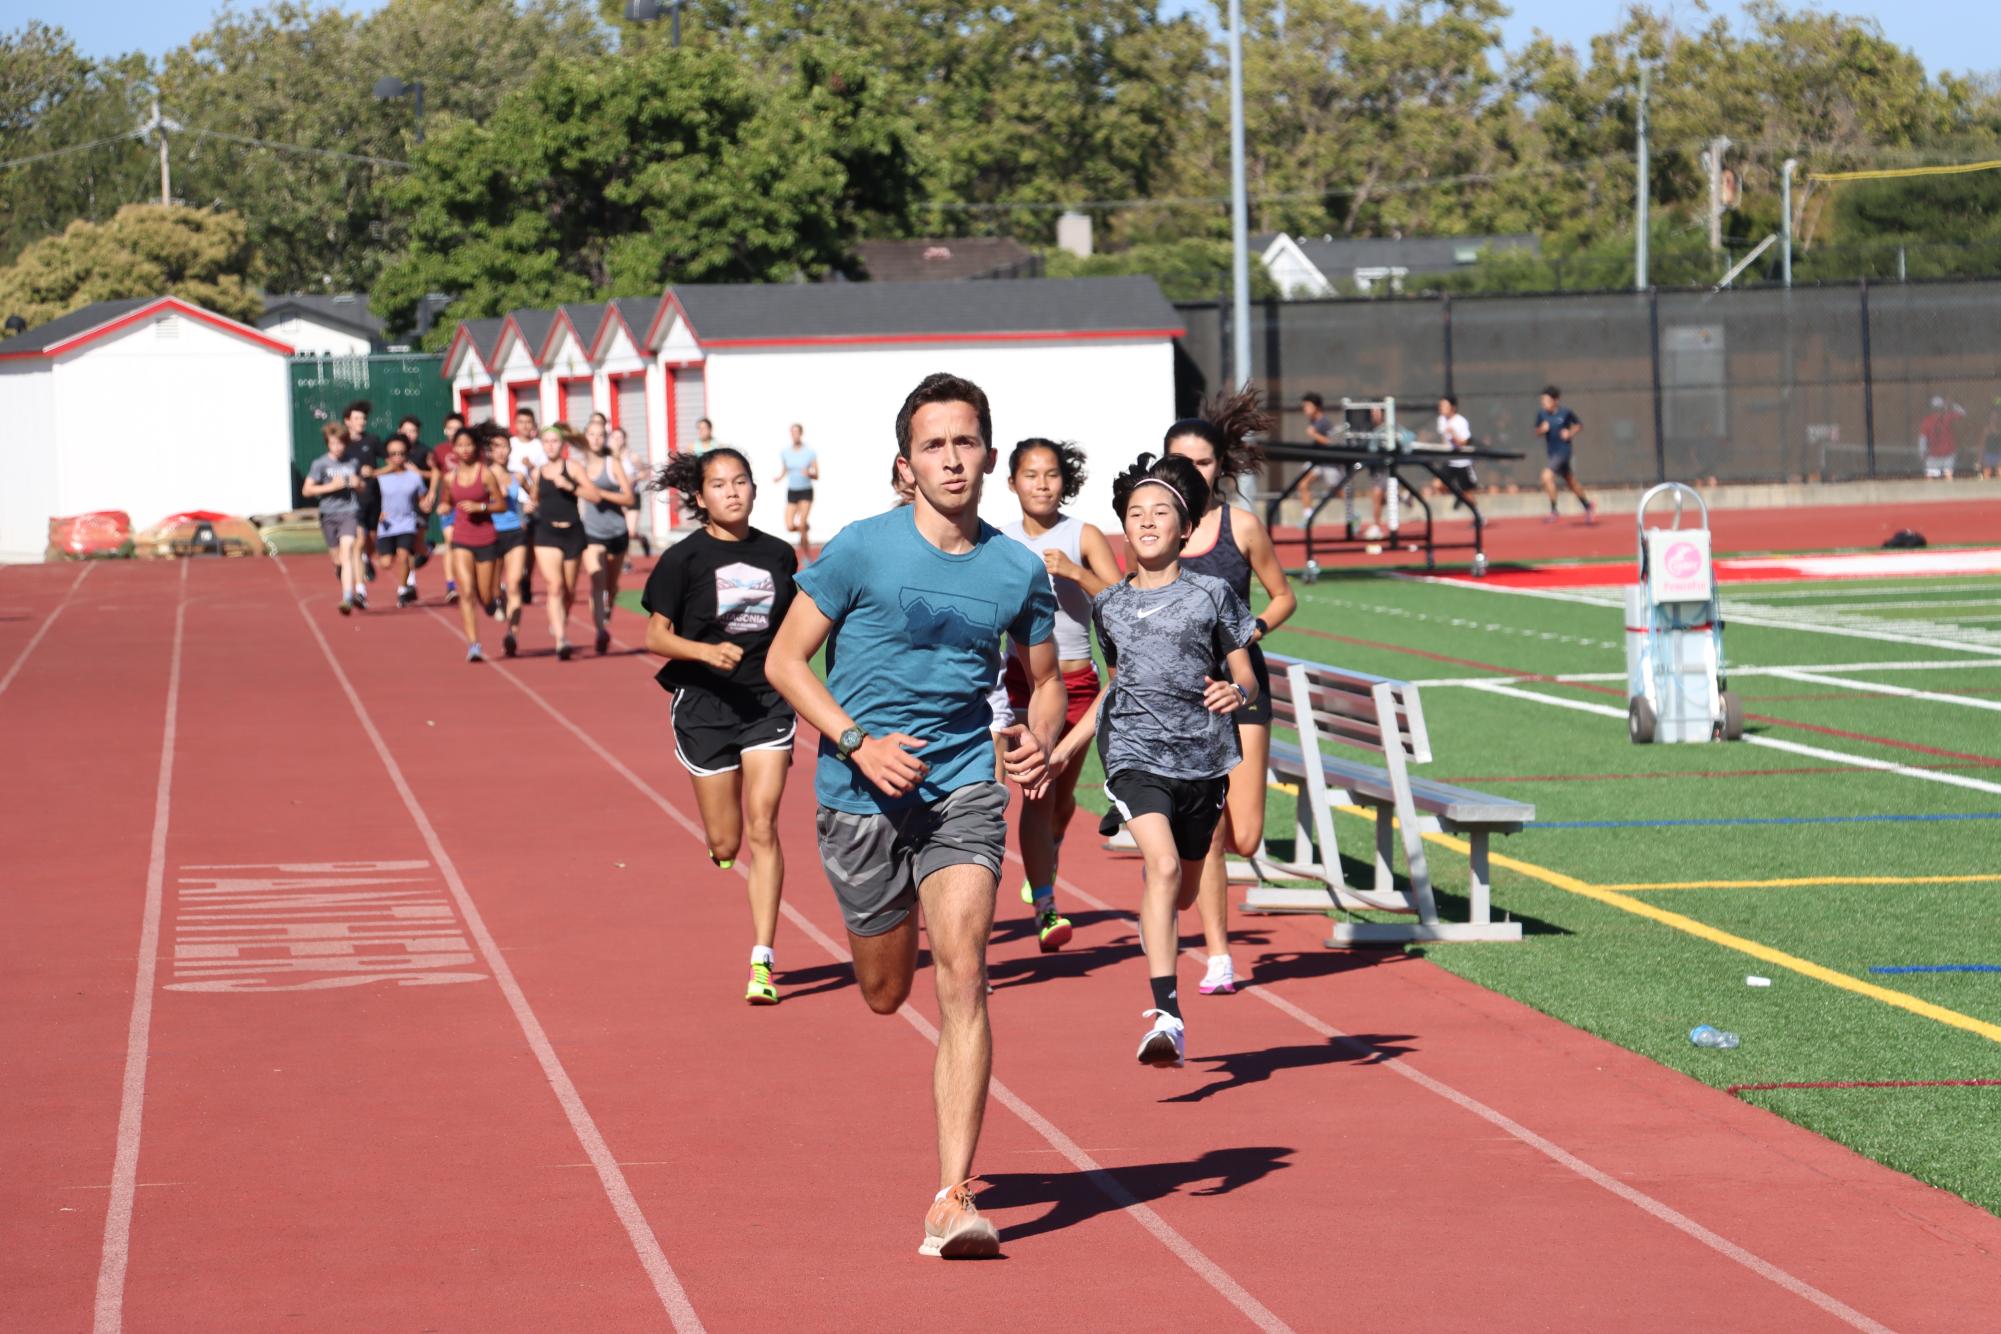 The cross country team sprints laps around the track during practice after school on Aug. 29 in preparation for their race.